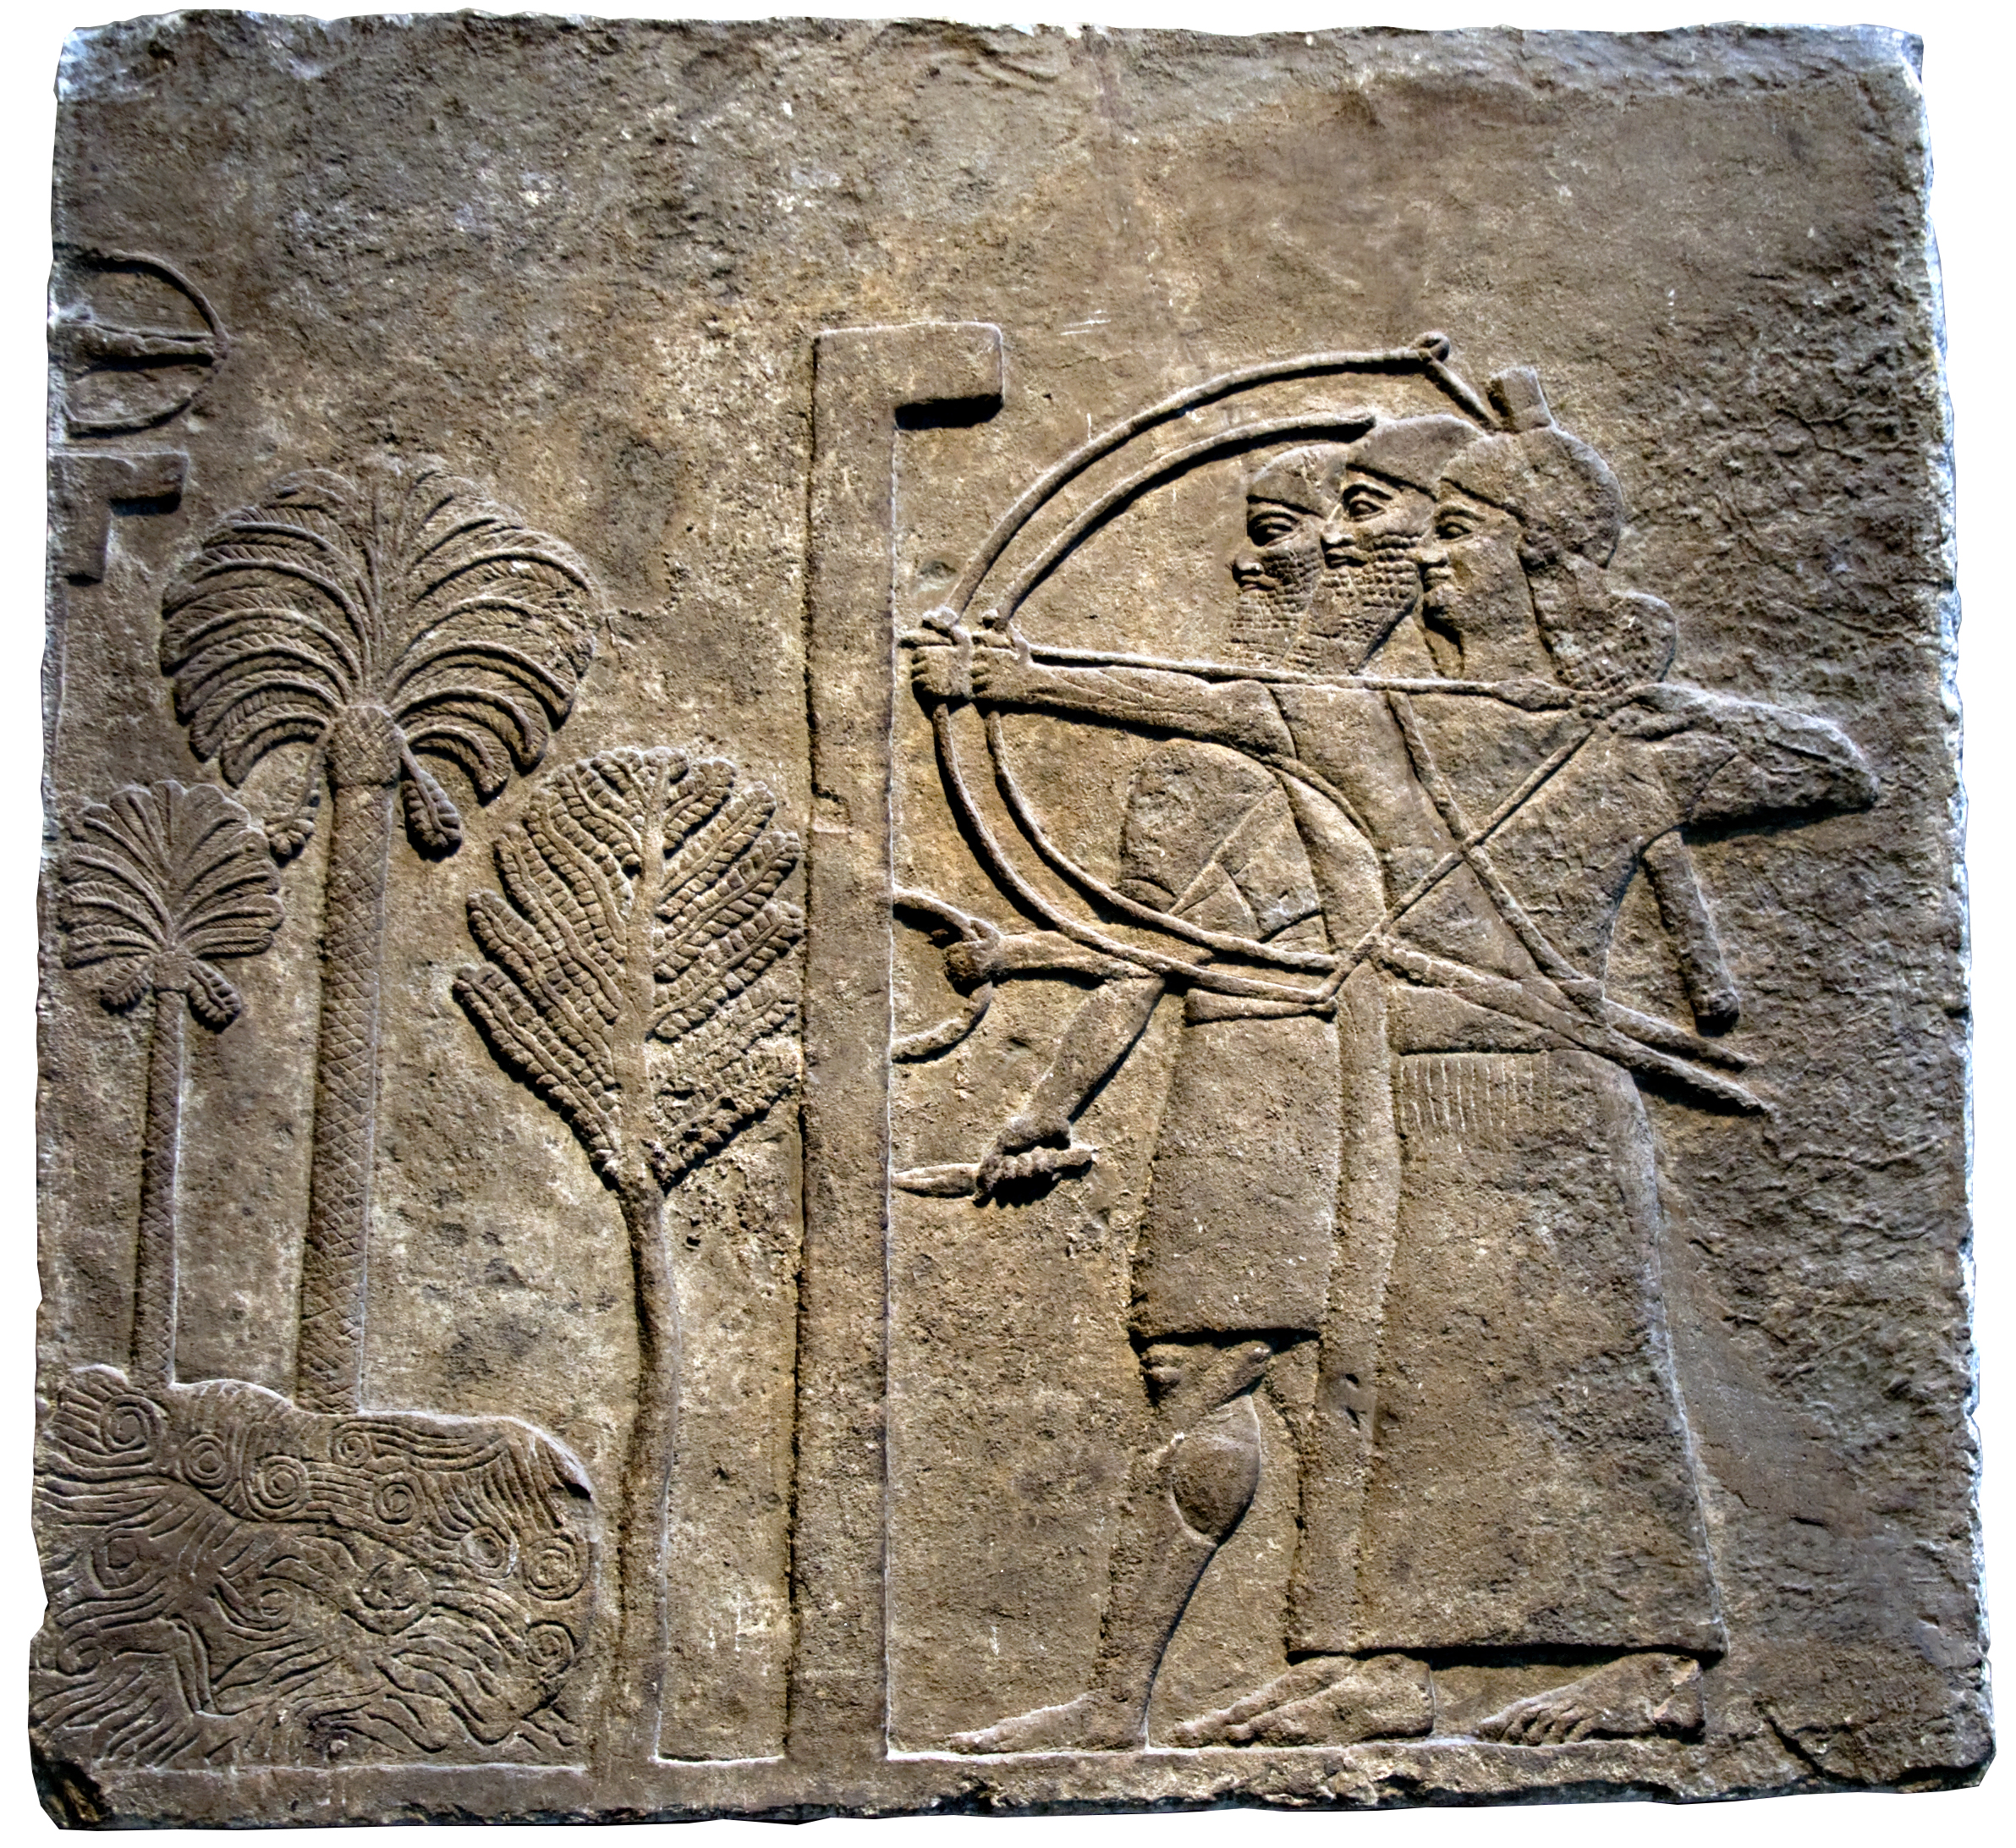 Wall relief from Nimrud, the sieging of a city, likely in Mesopotamia, c. 728 B.C.E. (British Museum)